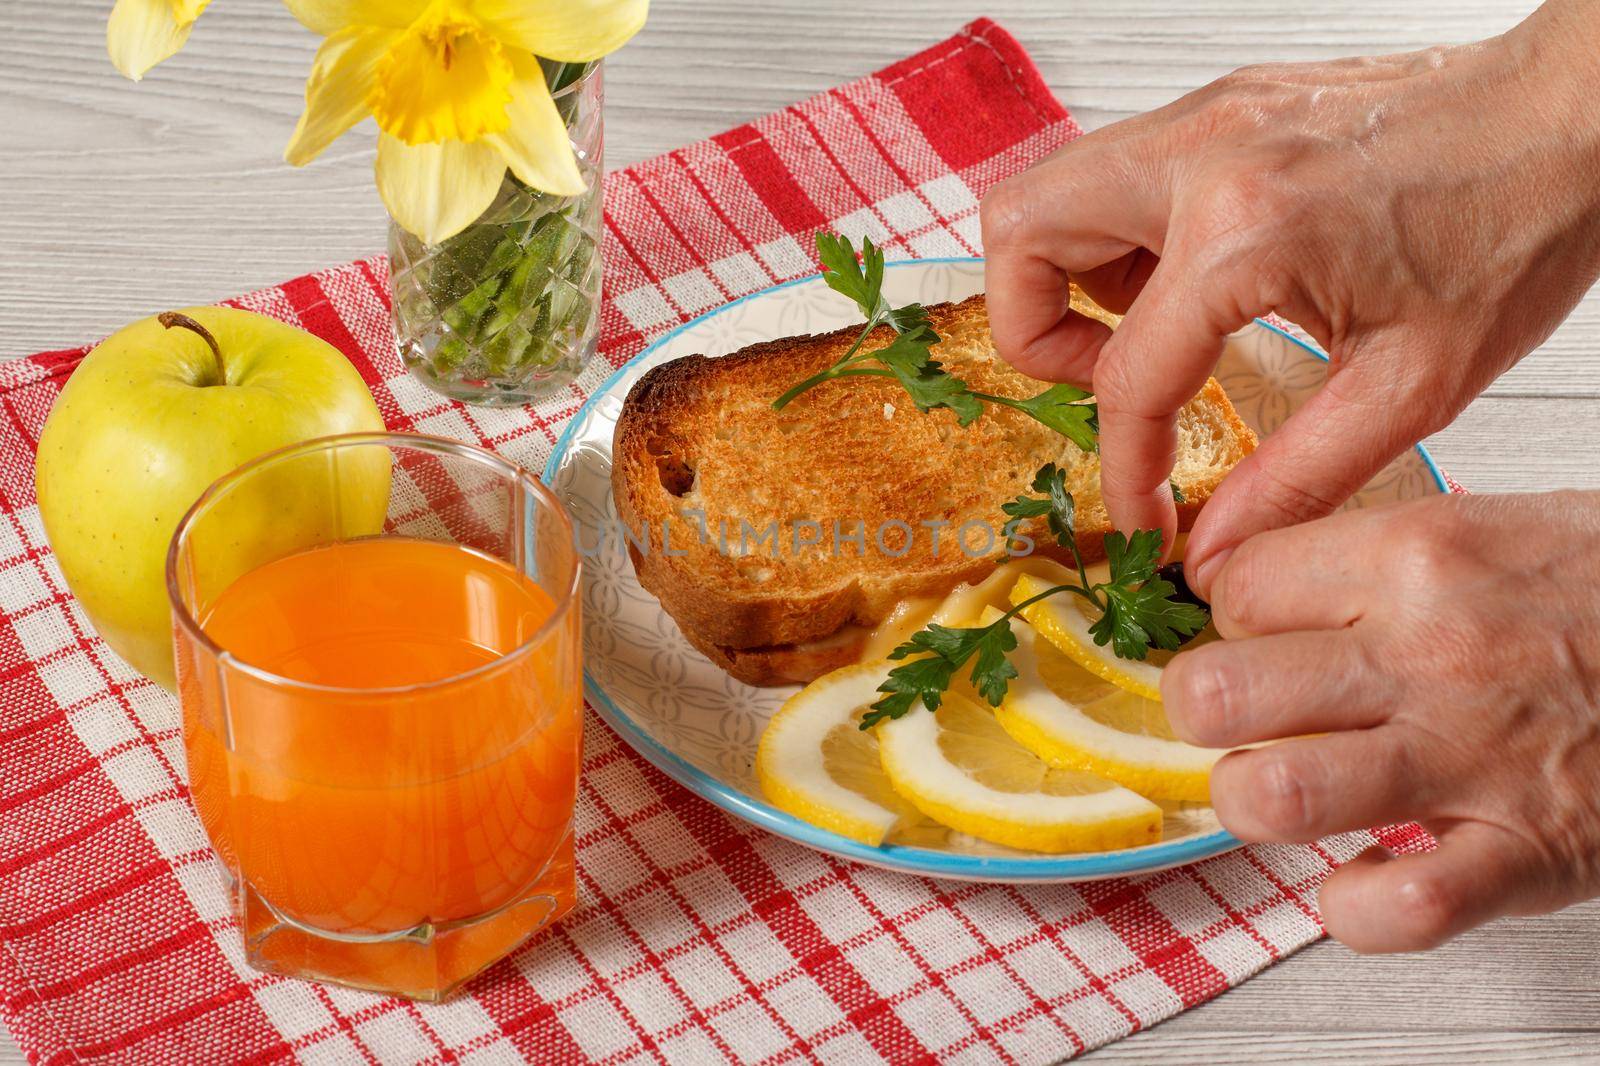 Female hands lay down breakfast food on a plate. Toast with butter and cheese, slices of lemon on plate, apple, bouquet of yellow daffodils and glass of orange juice on kitchen napkin